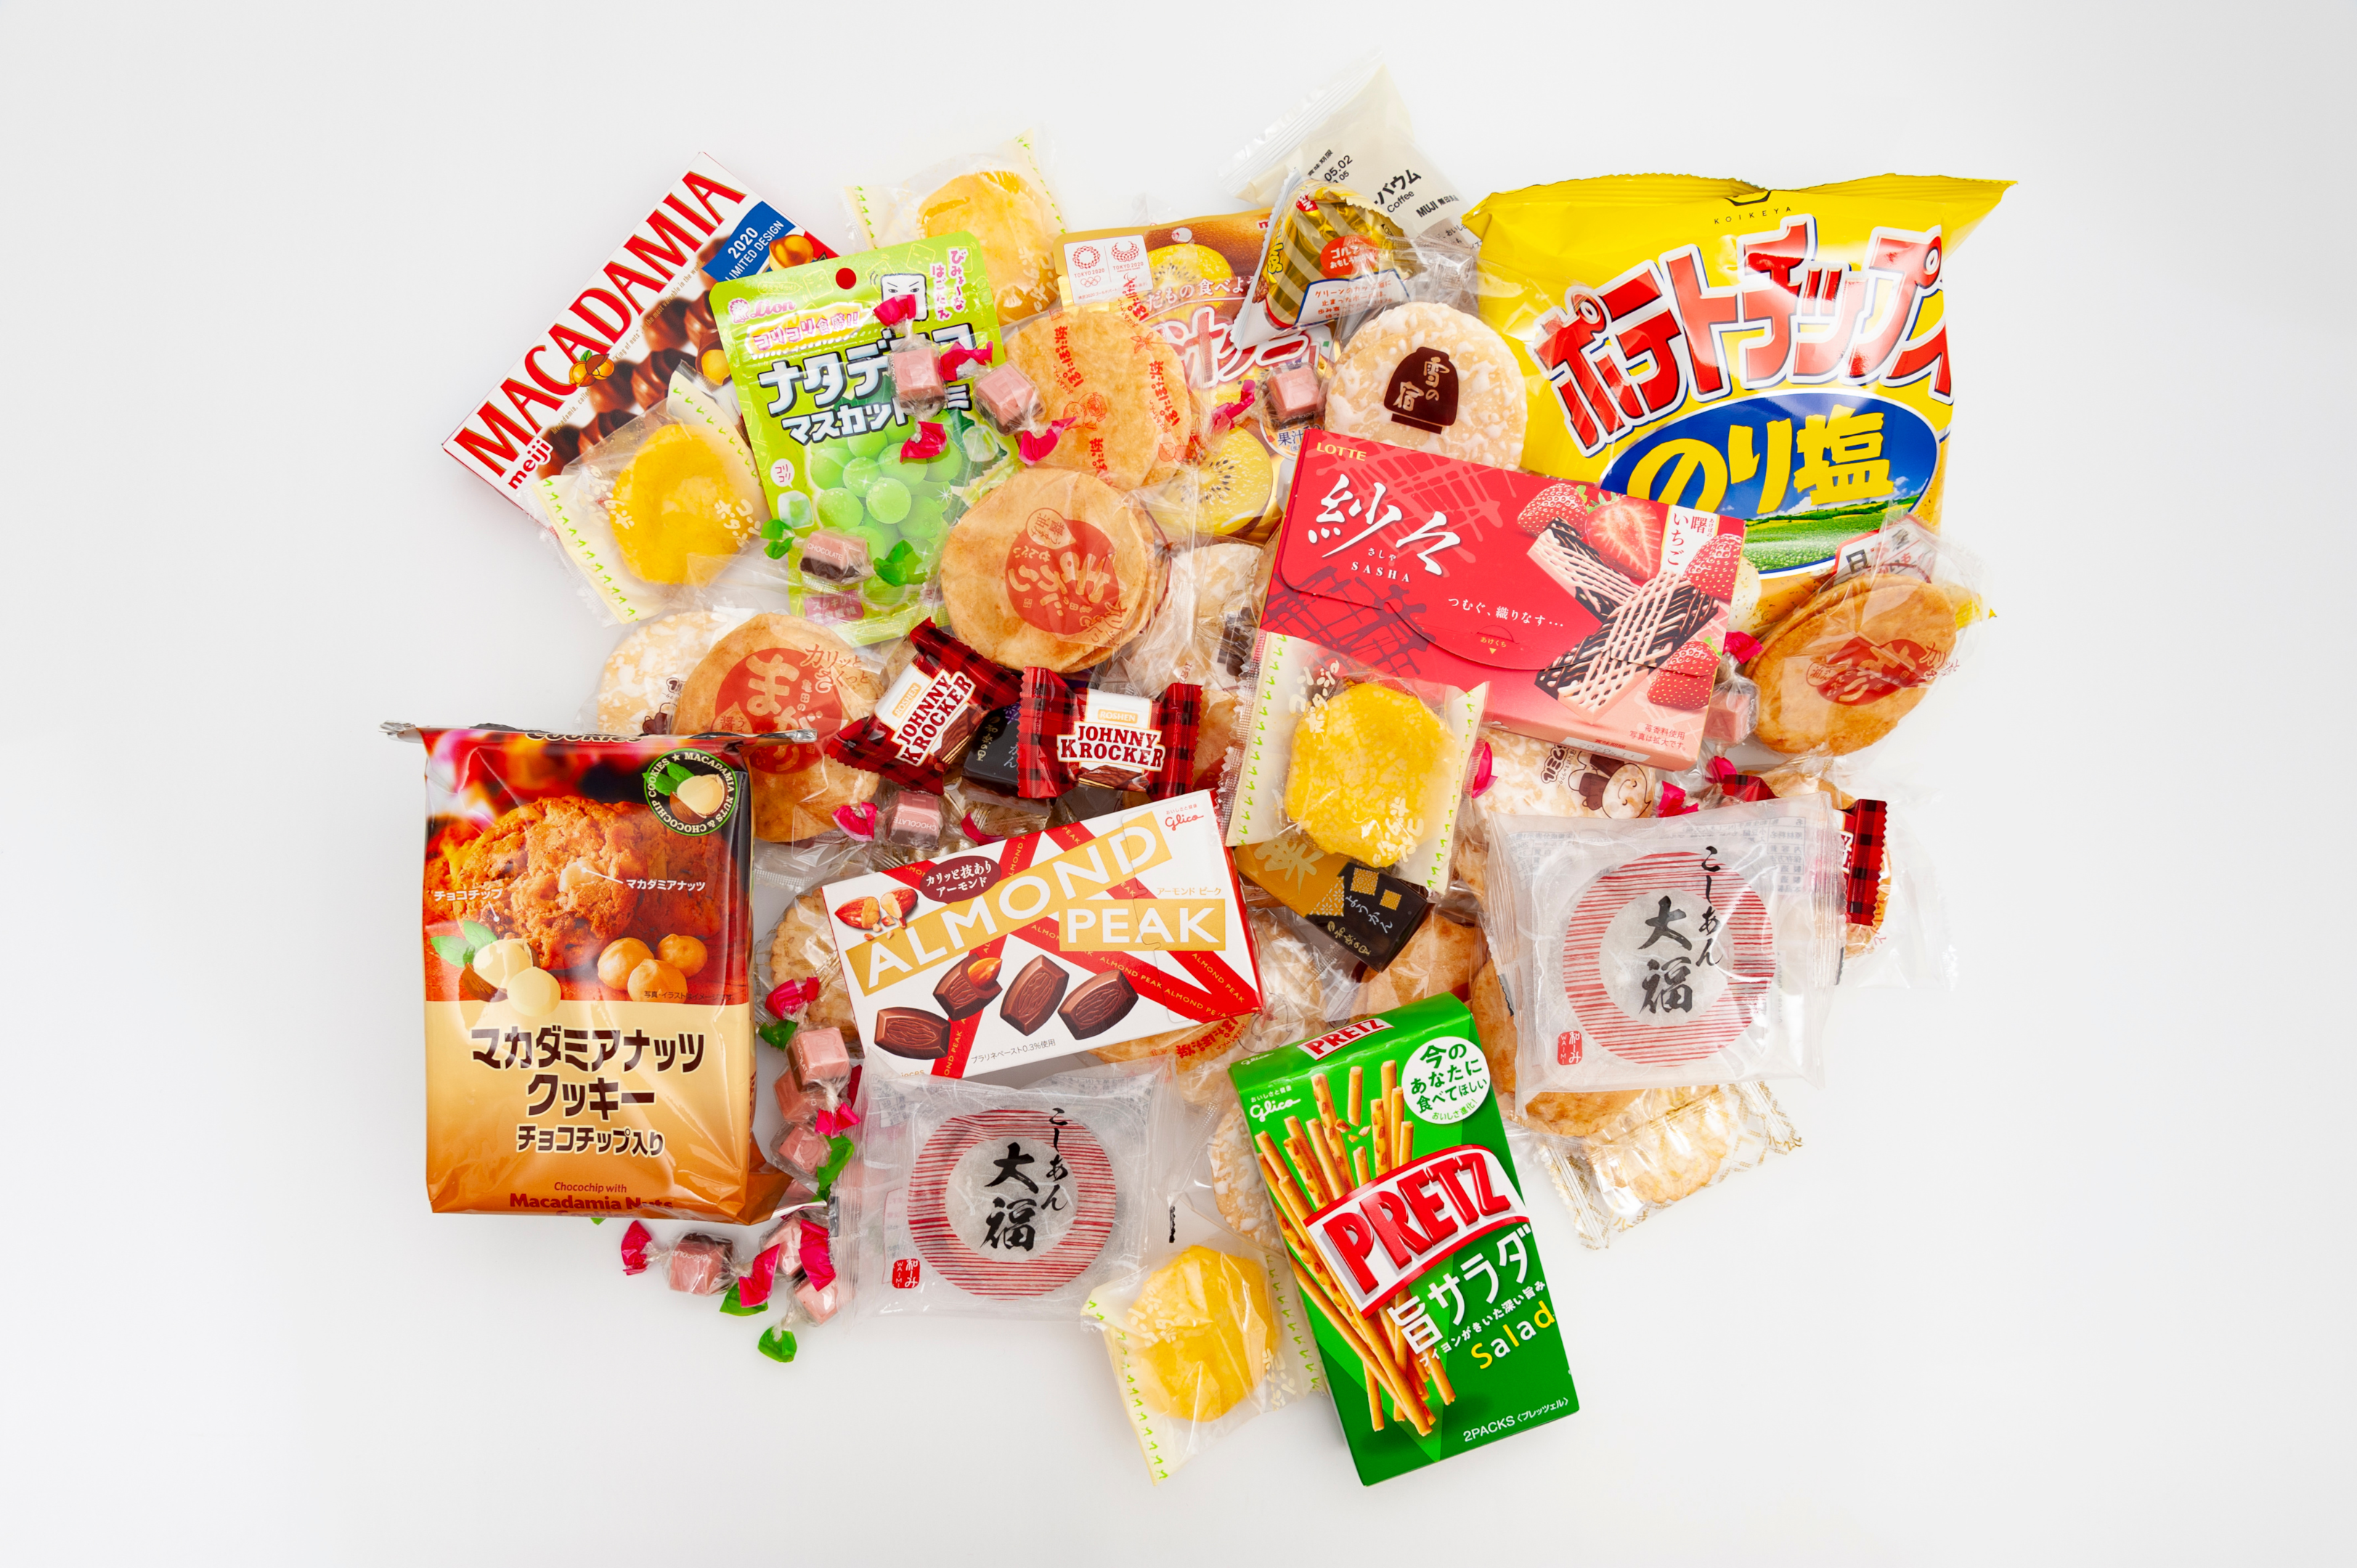 Traditional and modern Japanese sweets and snacks